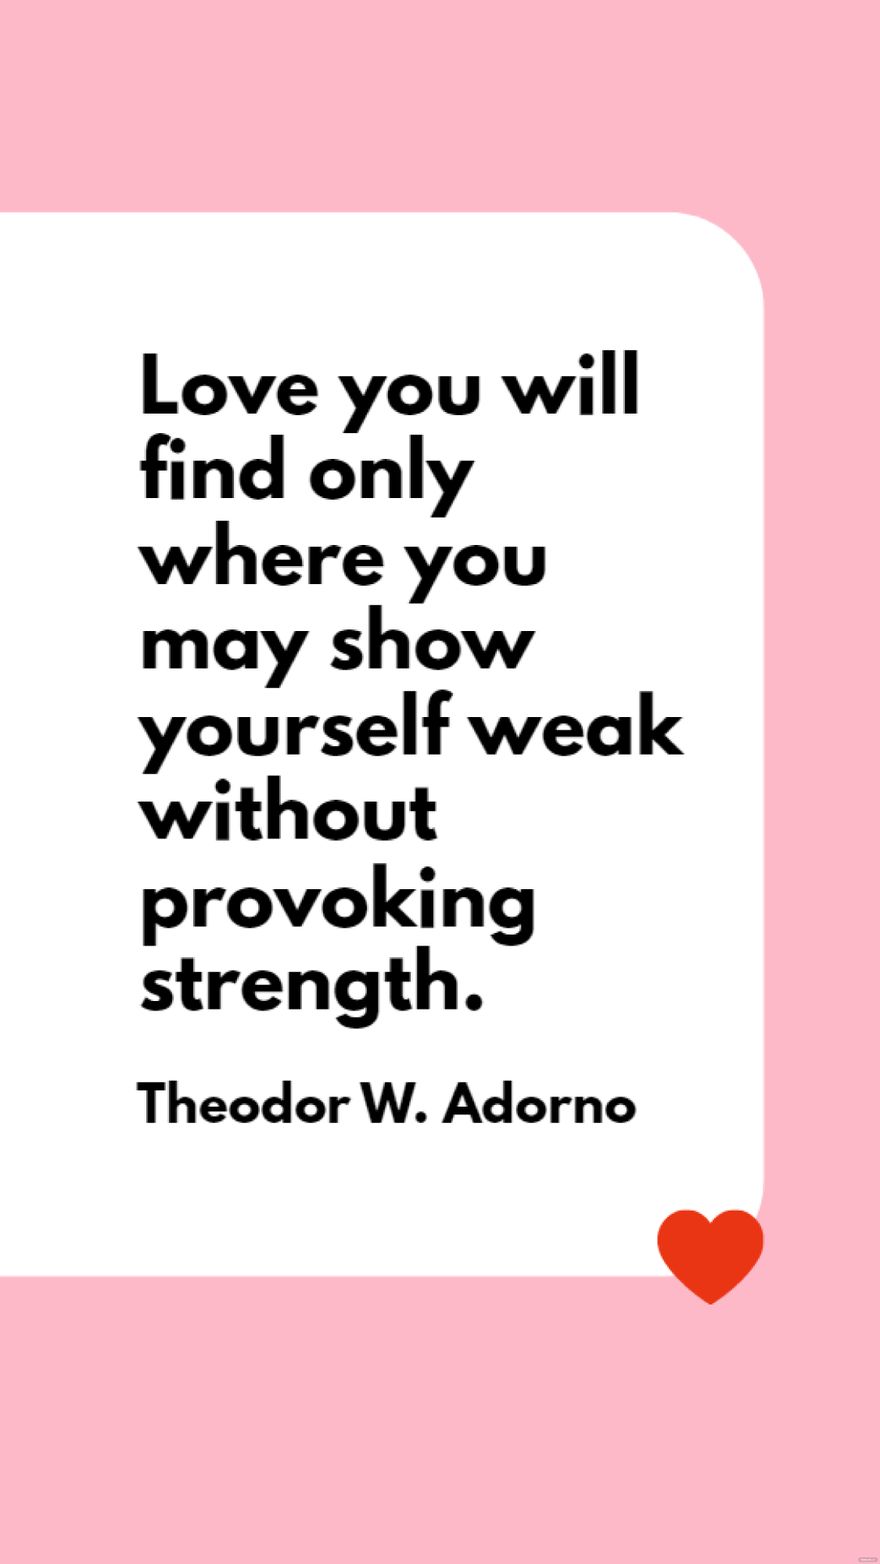 Theodor W. Adorno - Love you will find only where you may show yourself weak without provoking strength.